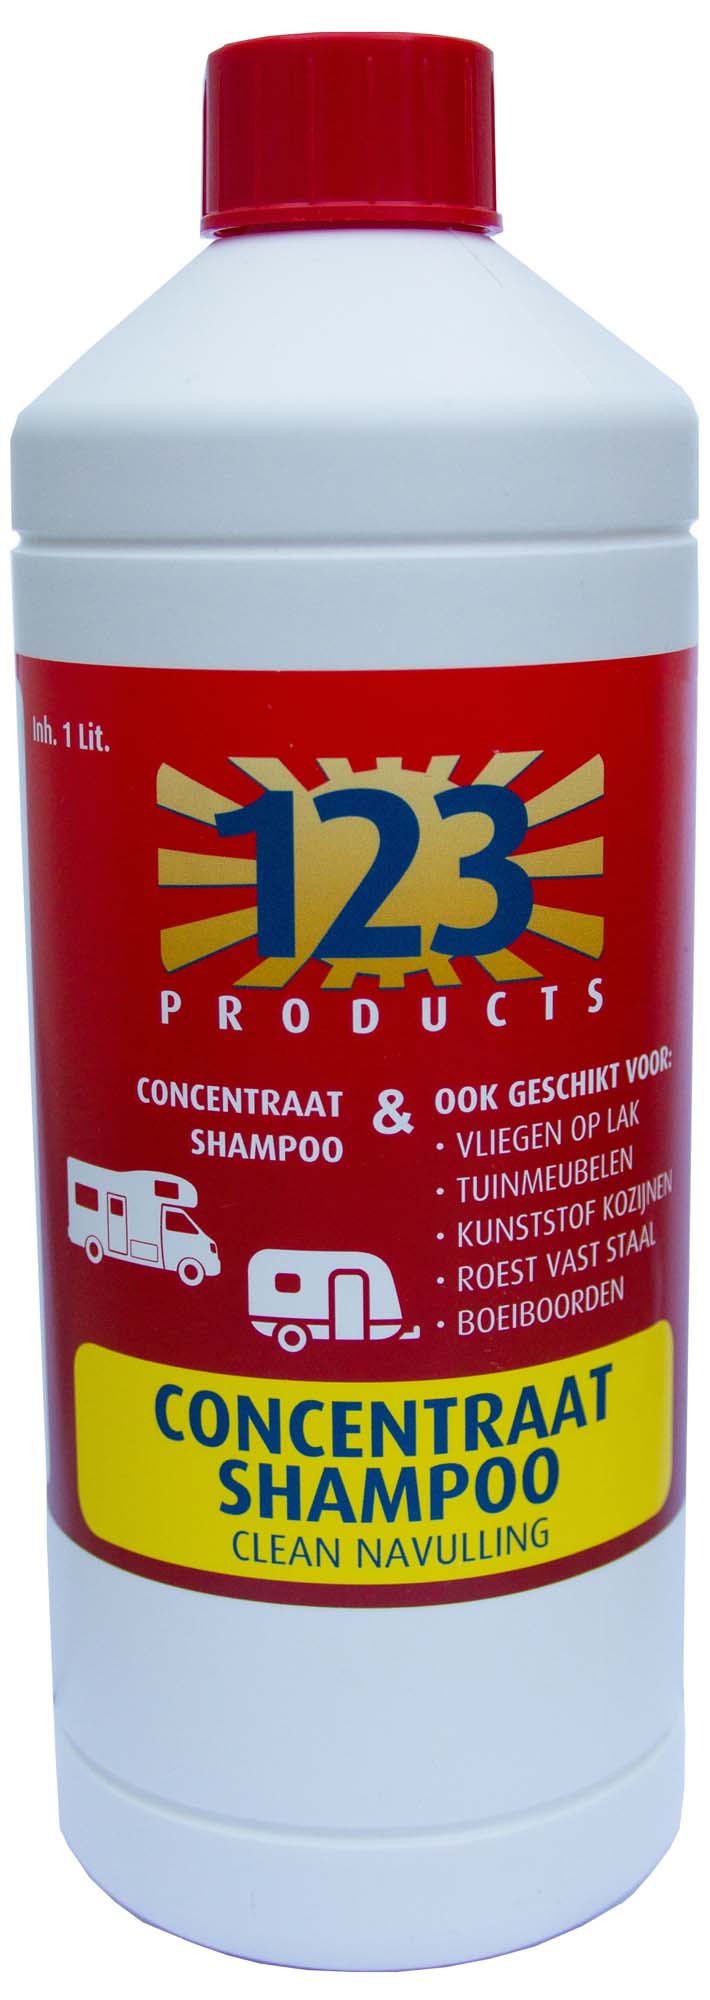 123 PRODUCTS Clean